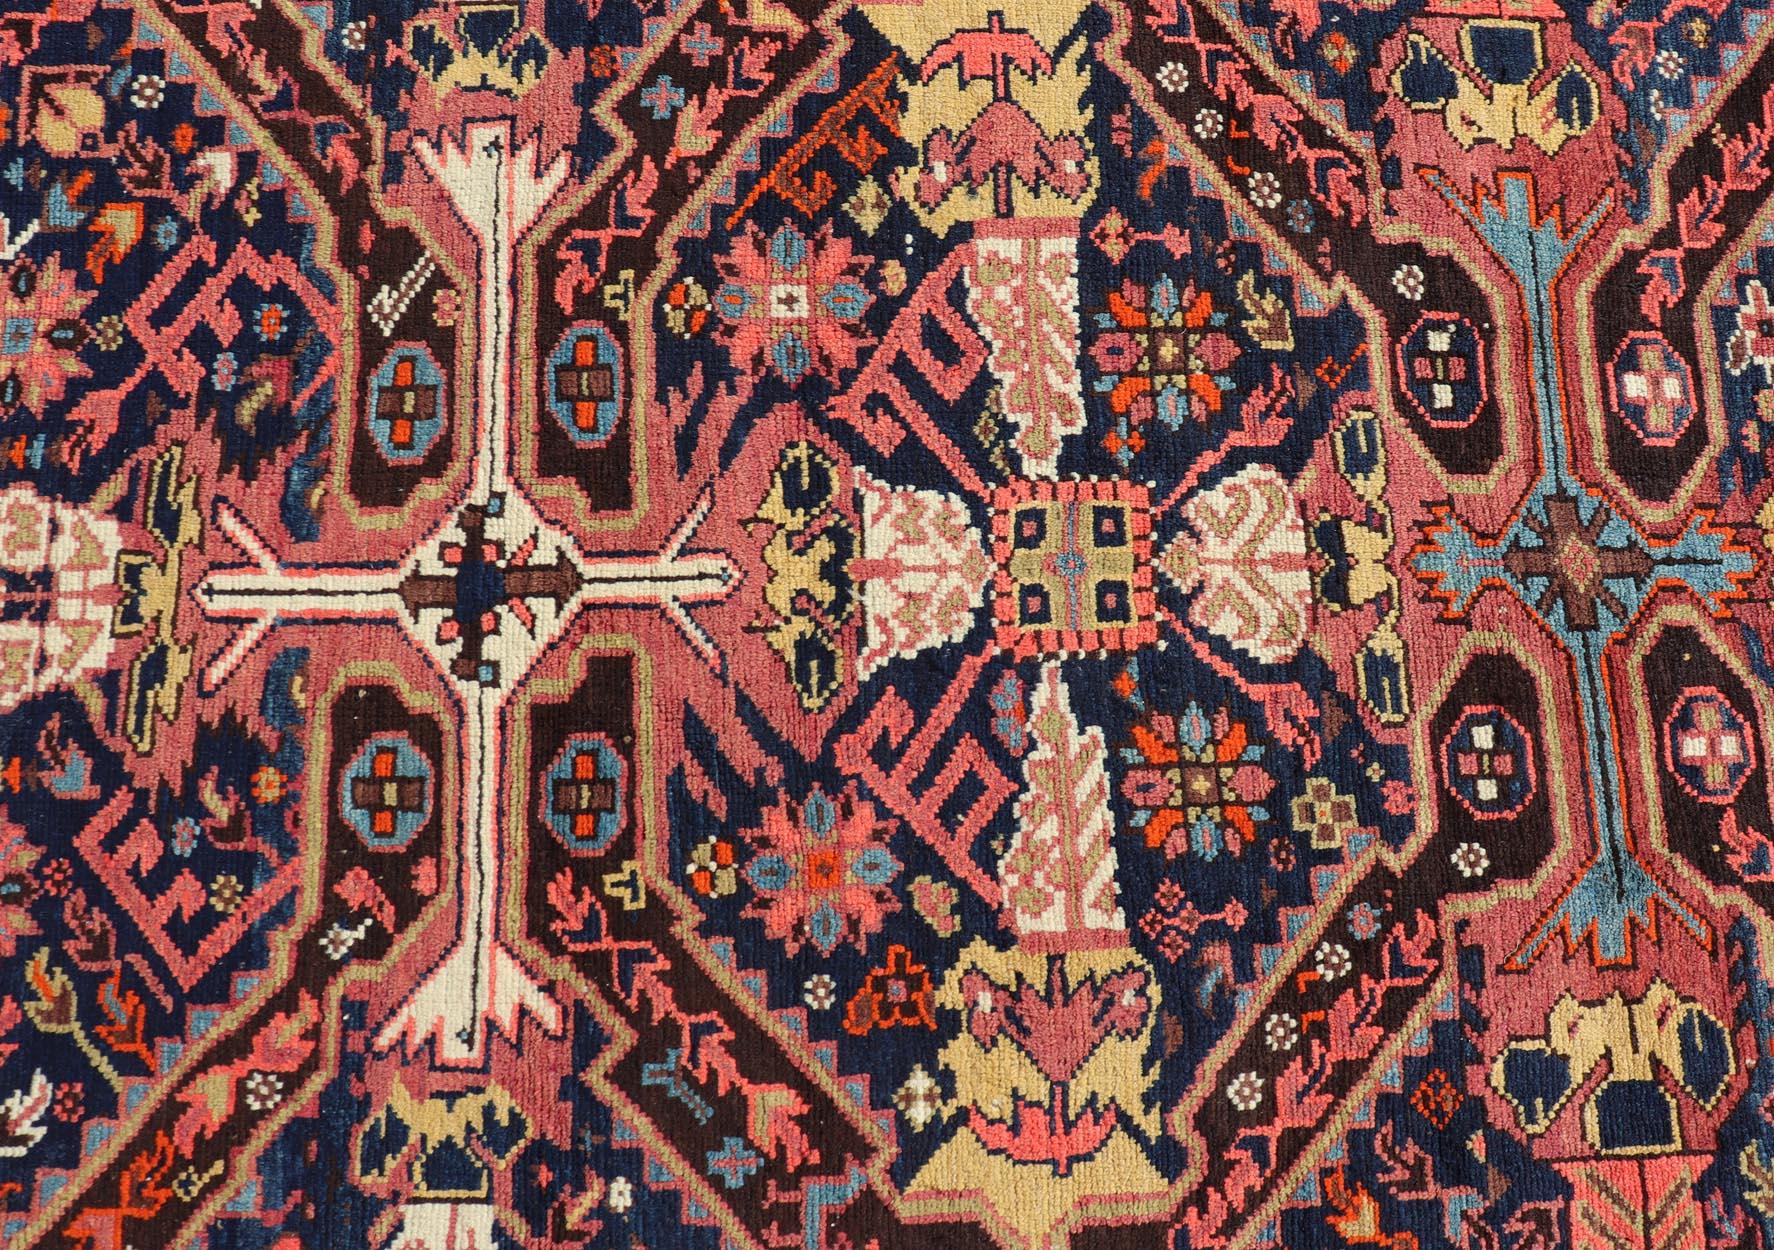 Measures: 5'10 x 12'10 

Seychour rugs are known for their heavily tribal designs. This fine piece in particular holds vibrant colors and bold contrasts. The middle field is a navy blue background with medallions decorated with ornate motifs in and